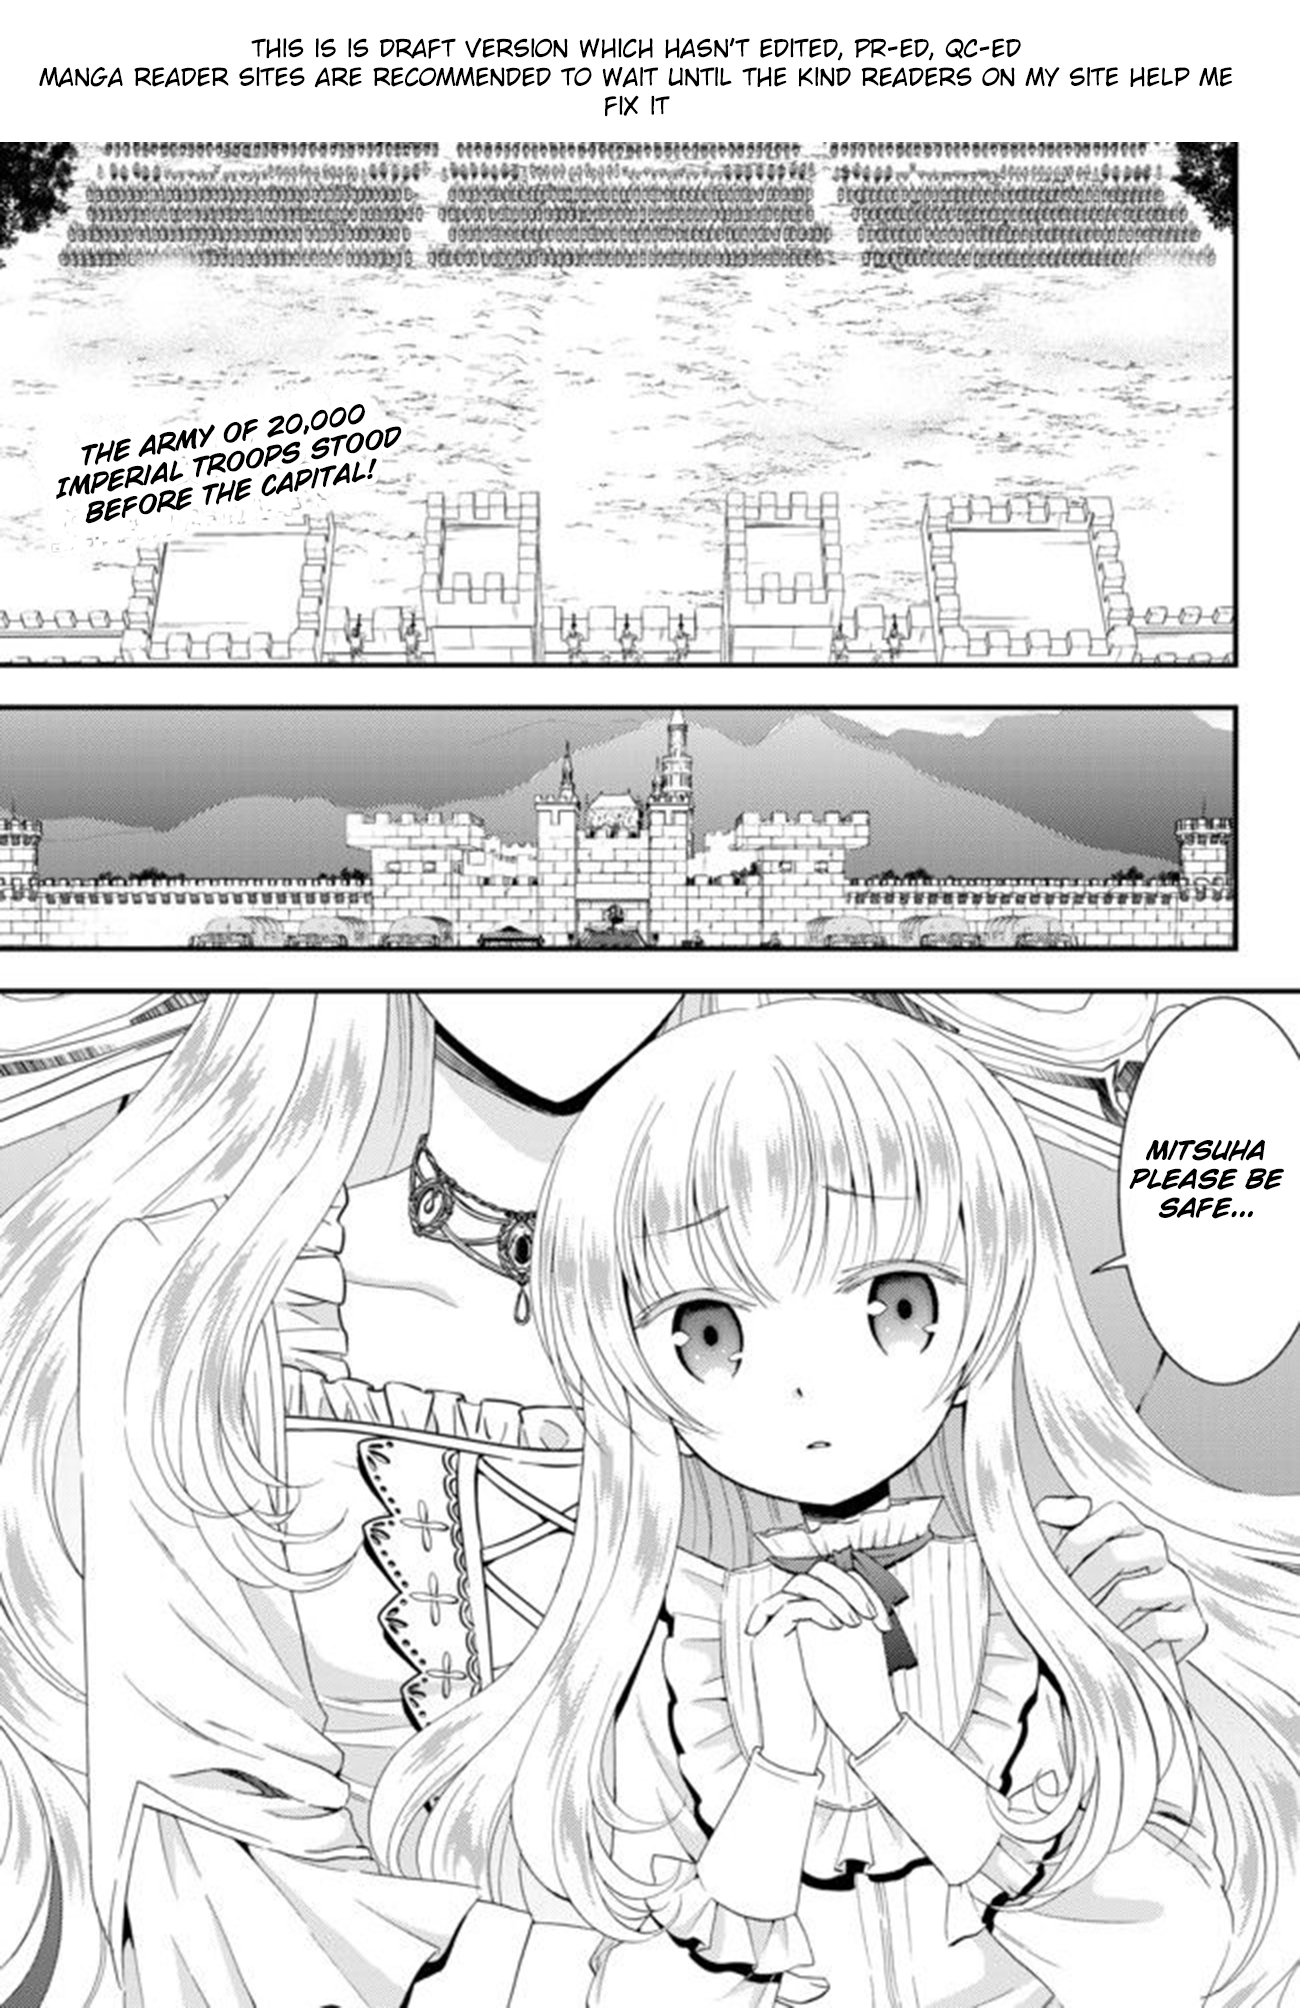 Saving 80,000 Gold Coins In The Different World For My Old Age Vol.4 Chapter 32: Shrine Princess, To The Battlefield (Part 2) - Picture 1